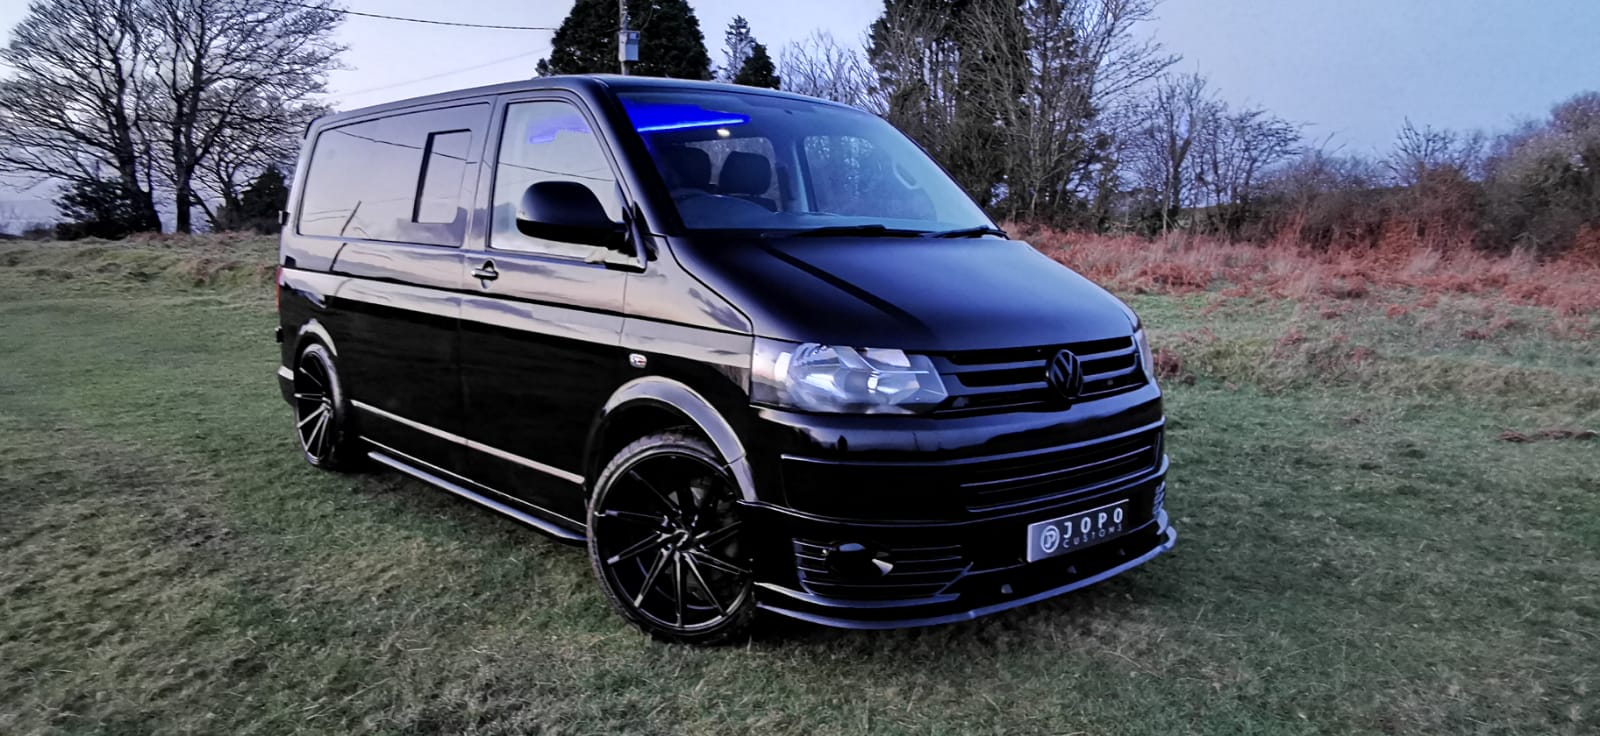 VW TRANSPORTER T5.1 only 88k. 63 plate, stunning condition, FSH